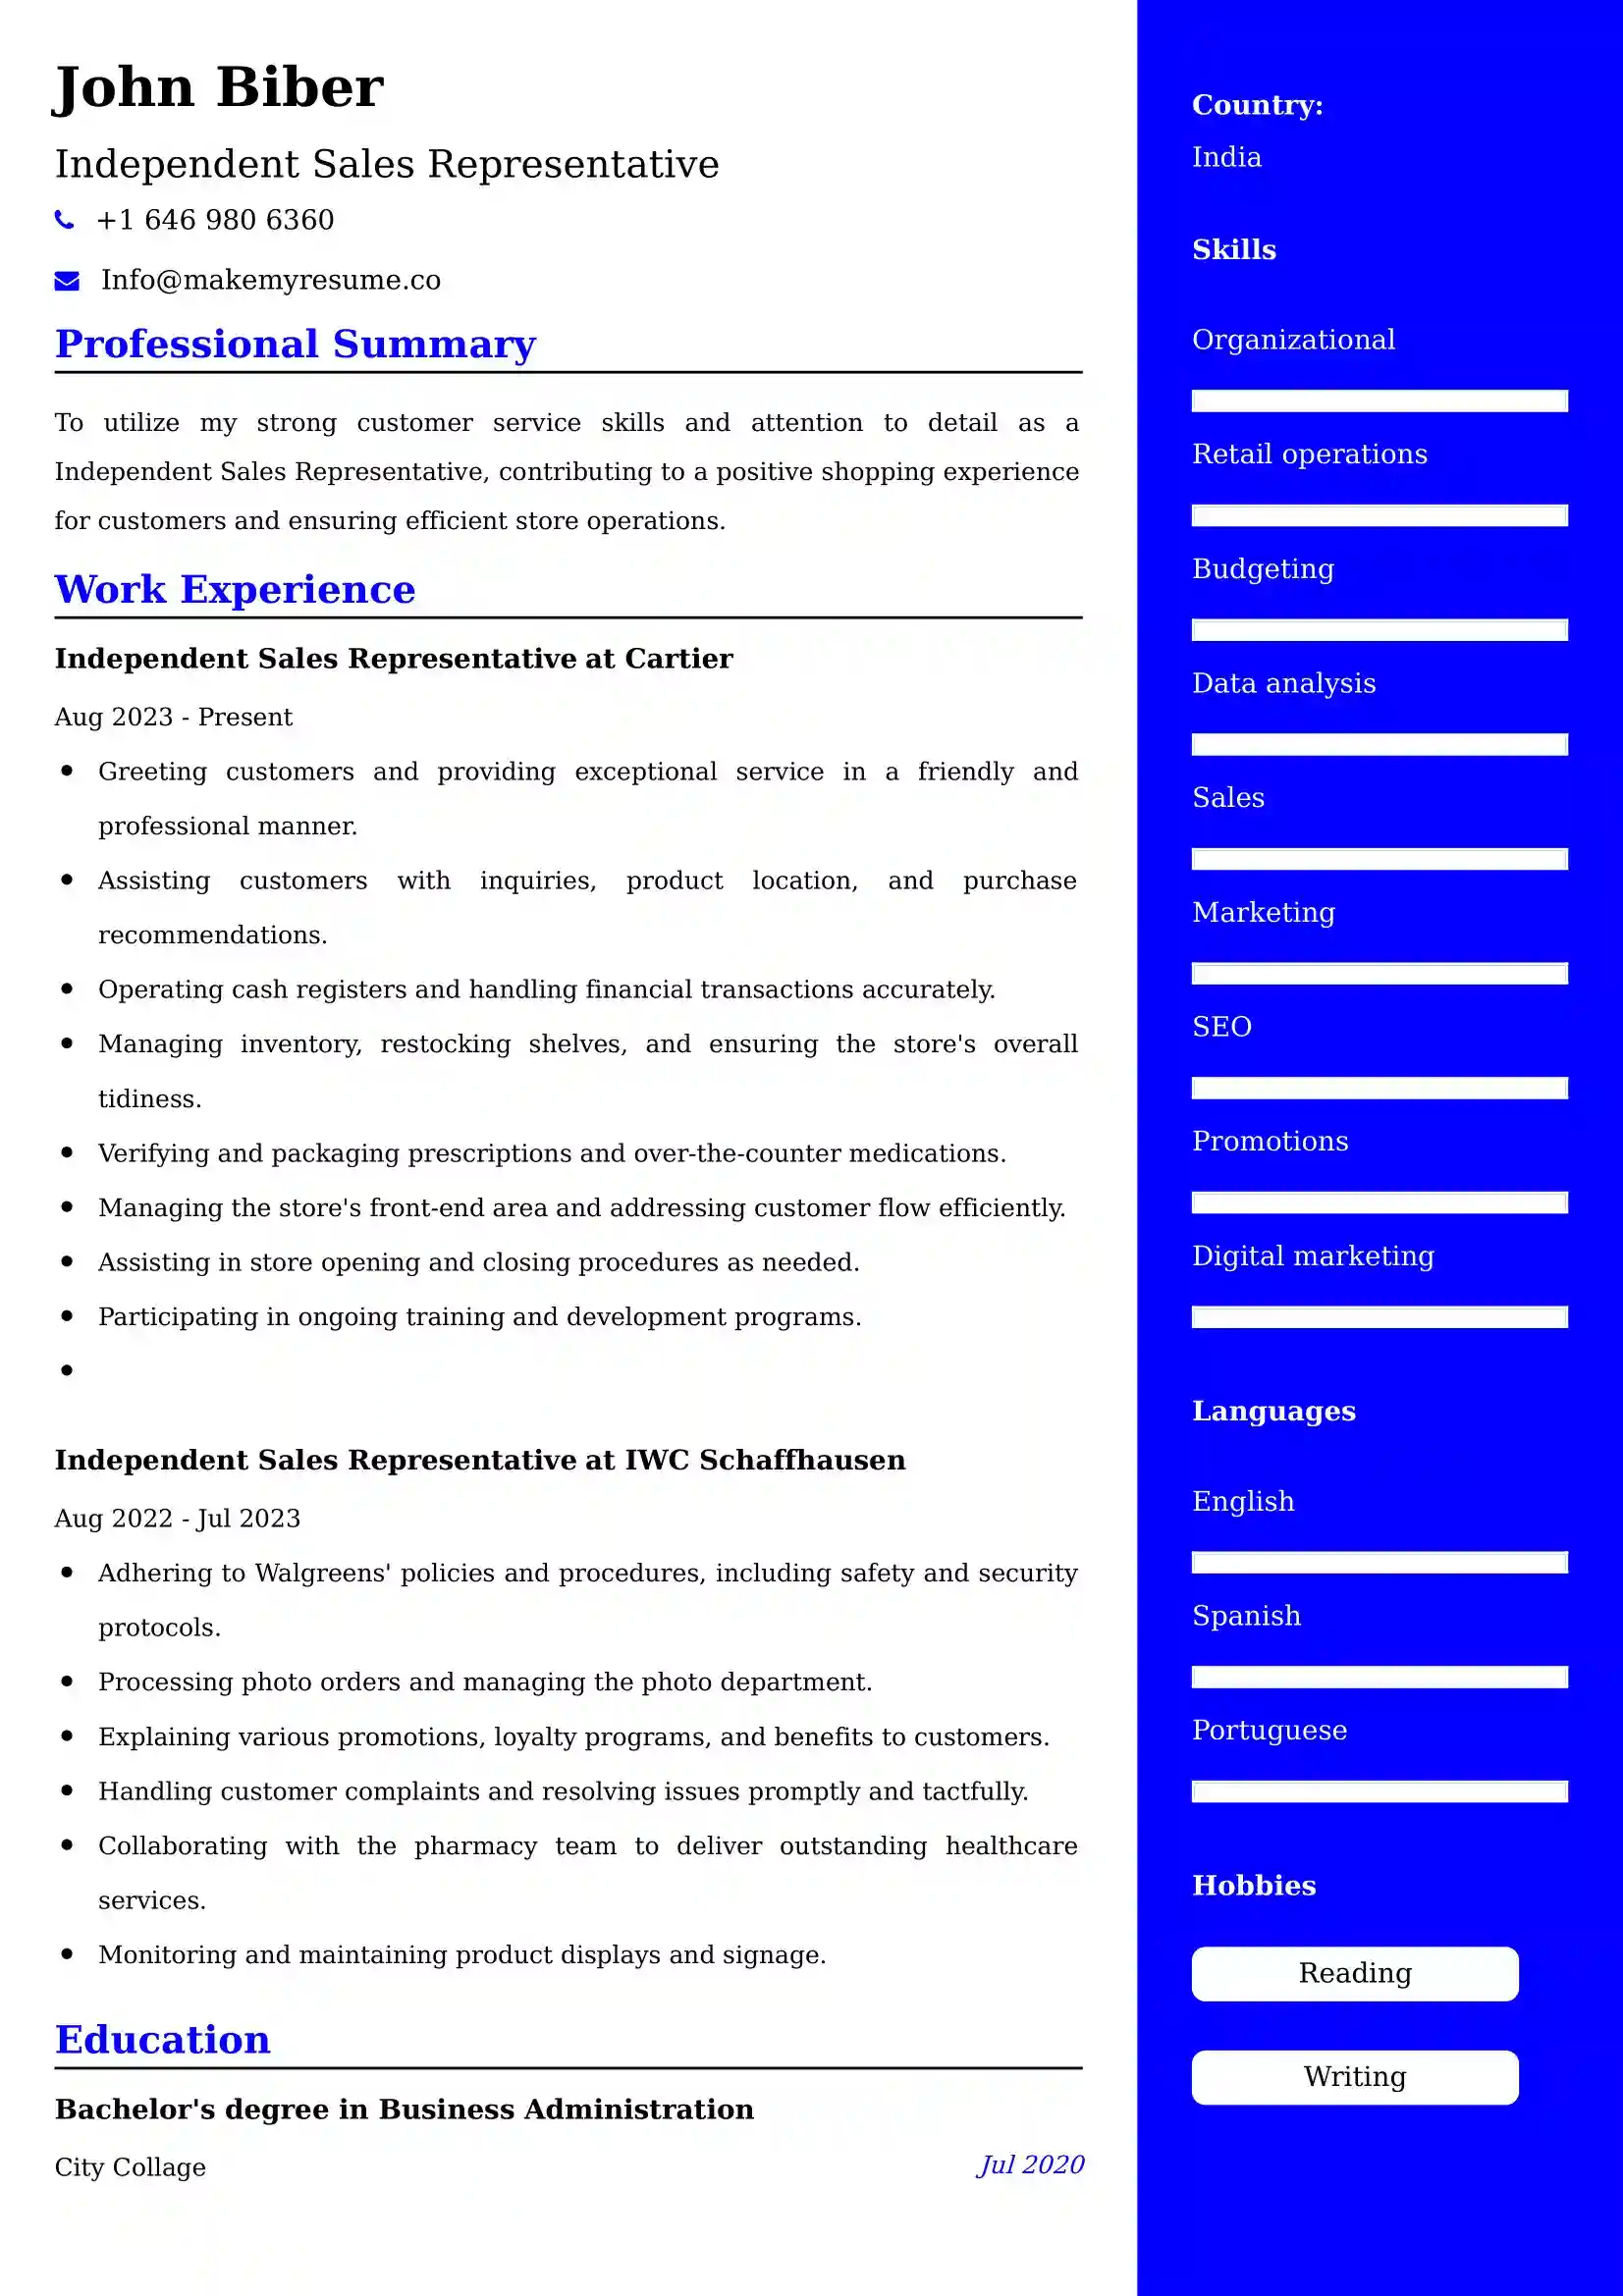 Independent Sales Representative Resume Examples - UK Format, Latest Template.